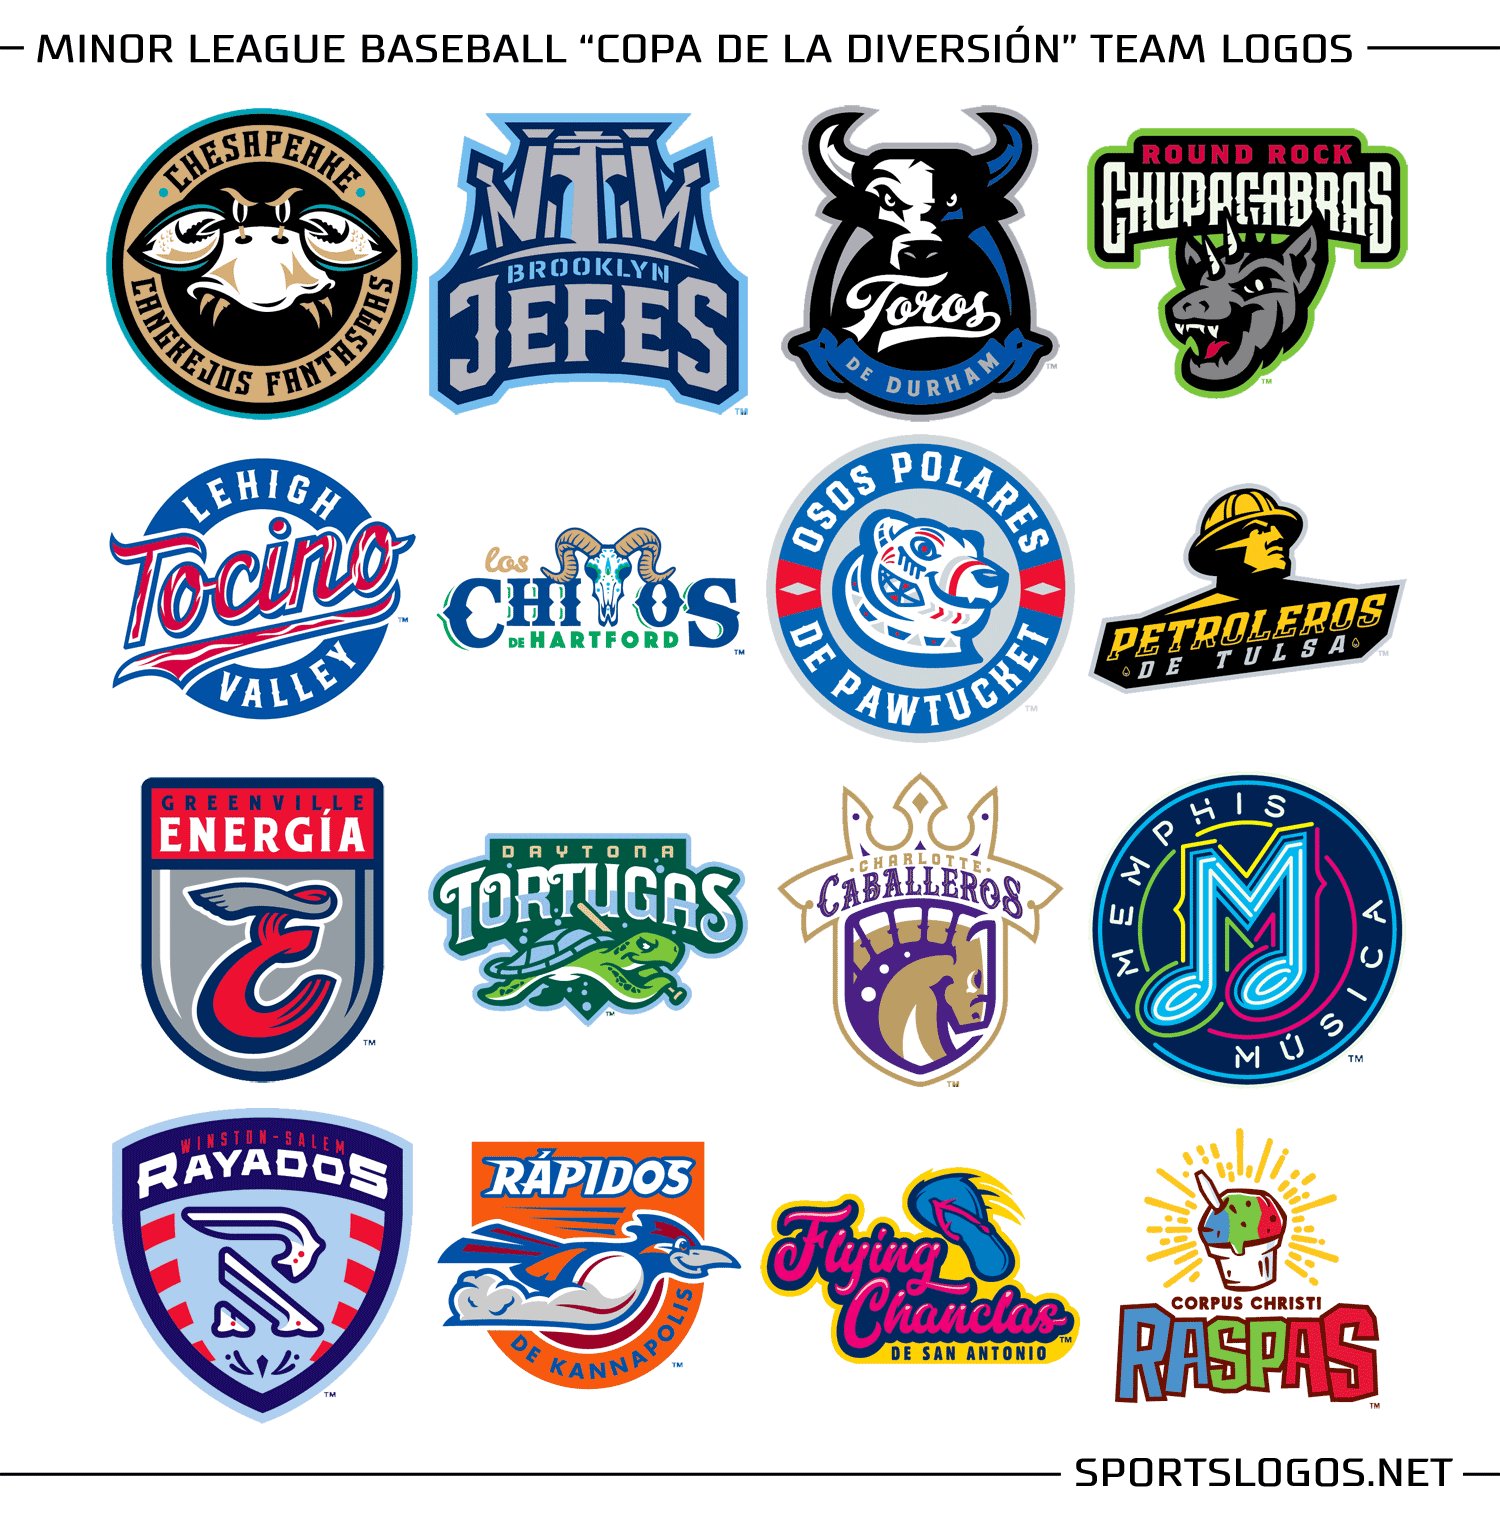 Chris Creamer  SportsLogos.Net on X: The first batch of  #CopaDeLaDiversion team logos unveiled by Minor League Baseball today,  there's still another few dozen to come throughout the day #MiLB The  meanings